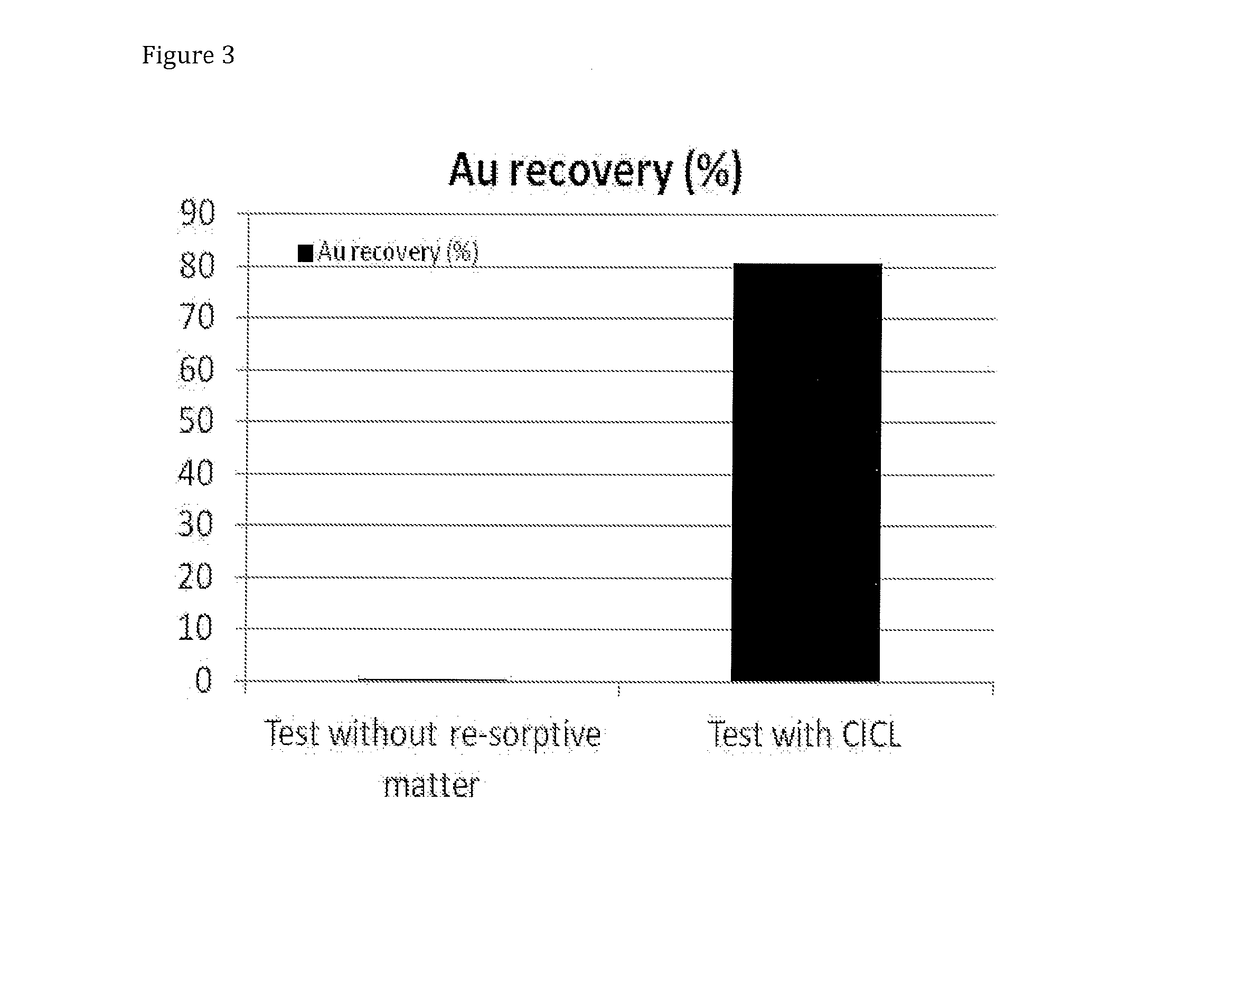 Process for recovering gold